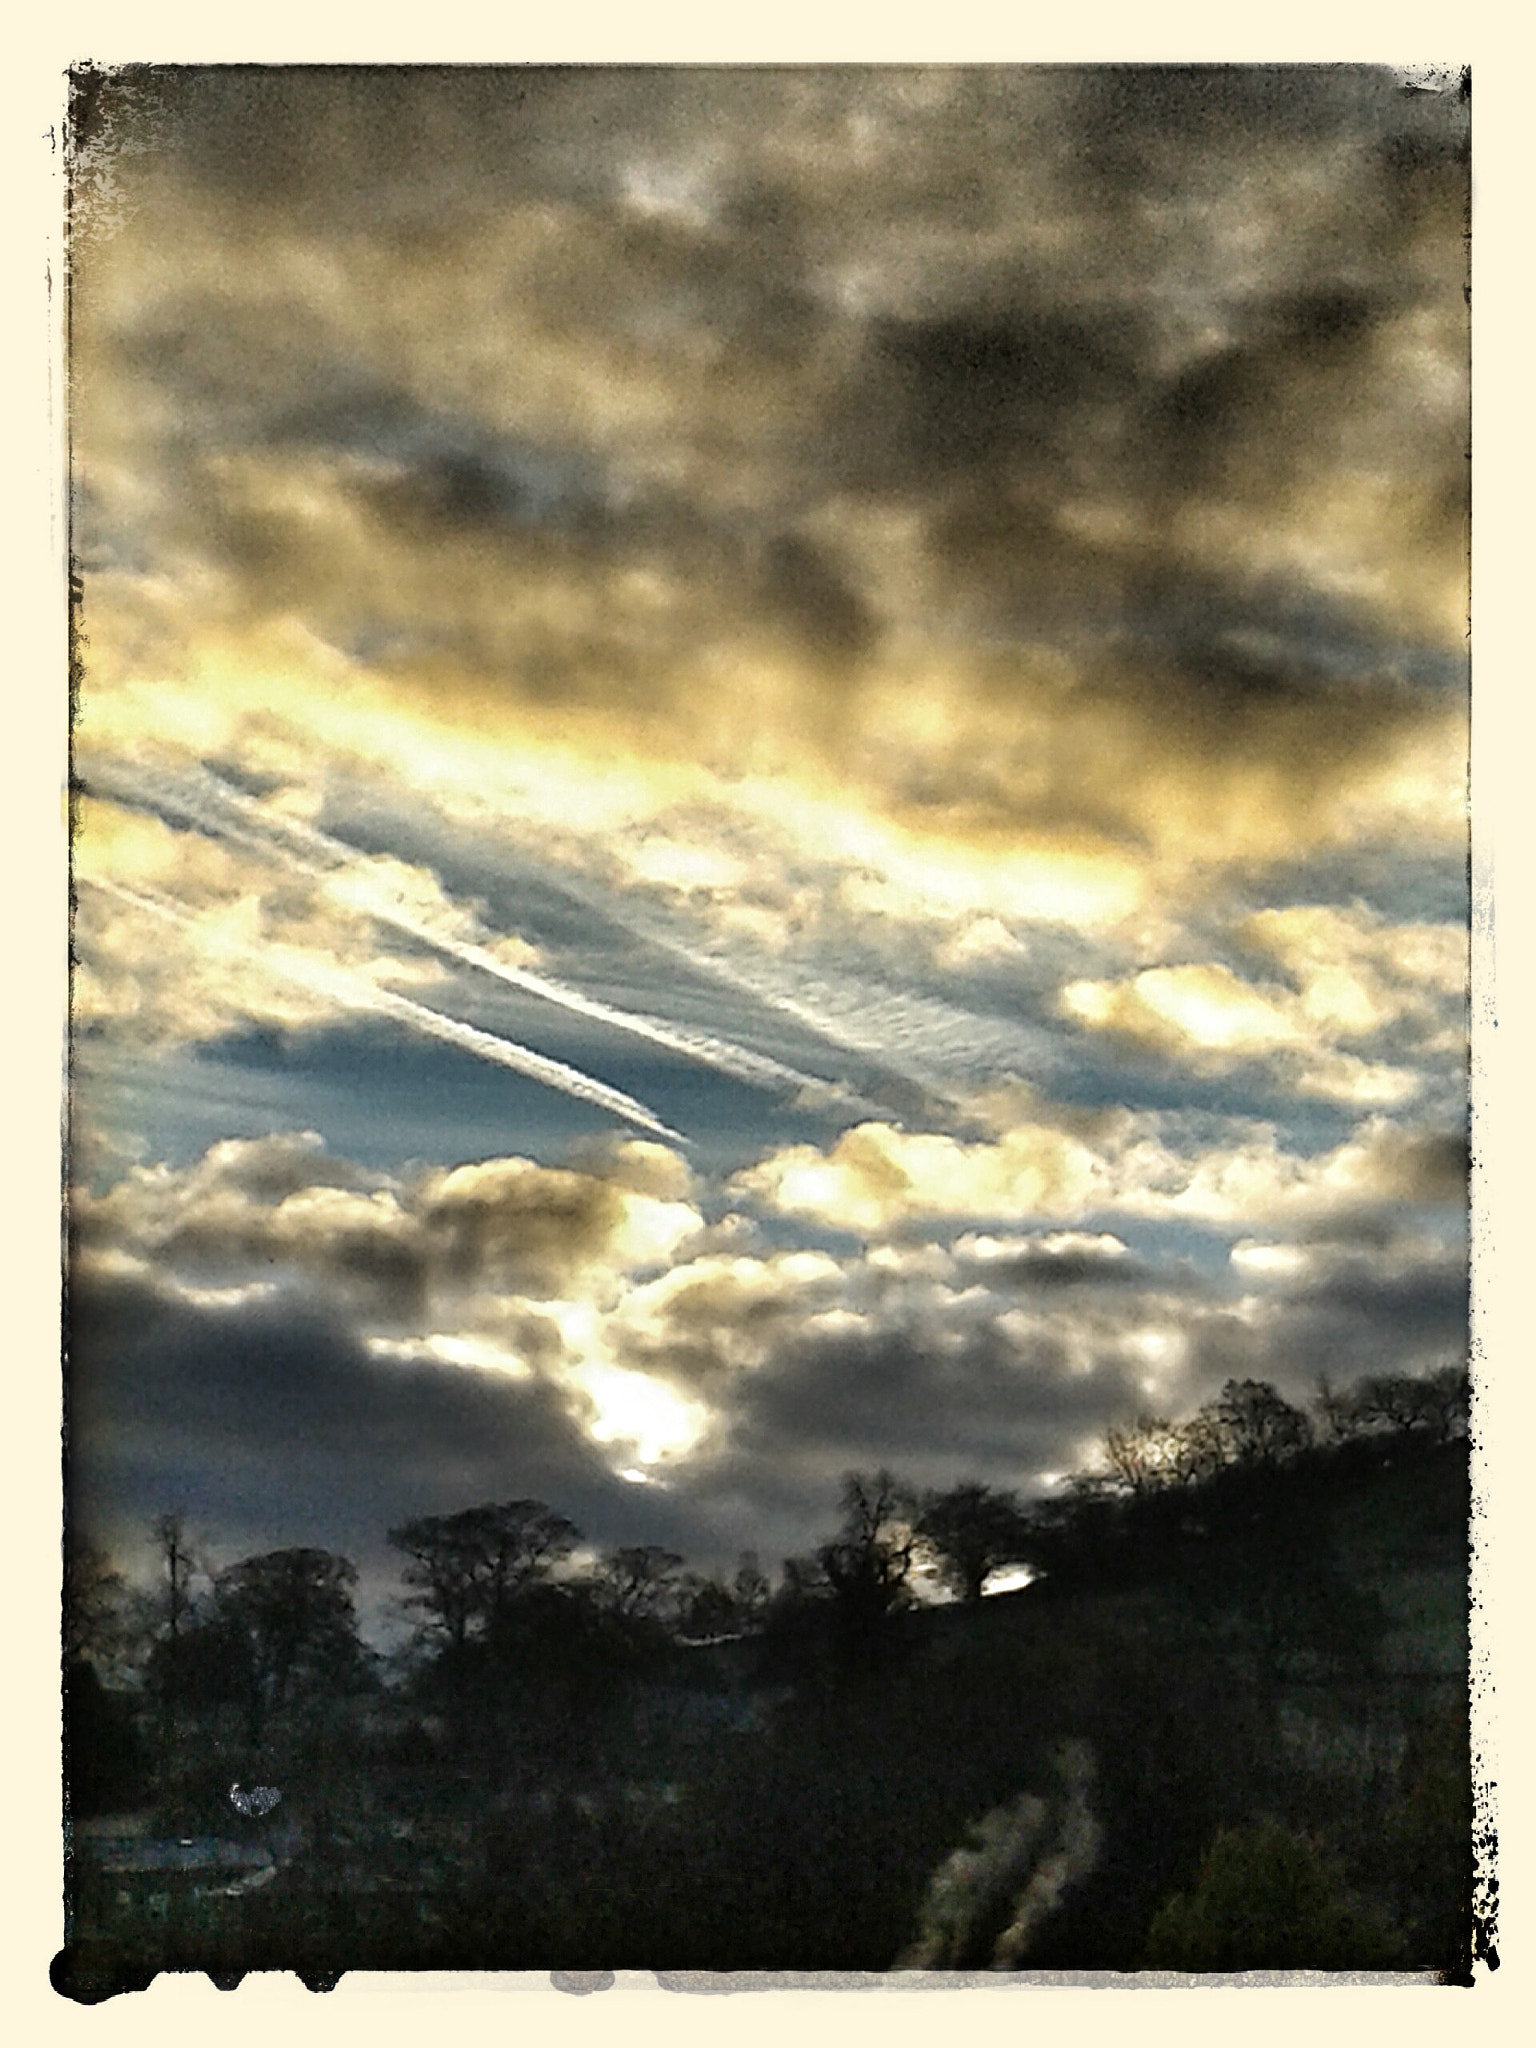 Samsung Galaxy S3 Mini sample photo. Dramatic cloudscape late one afternoon photography